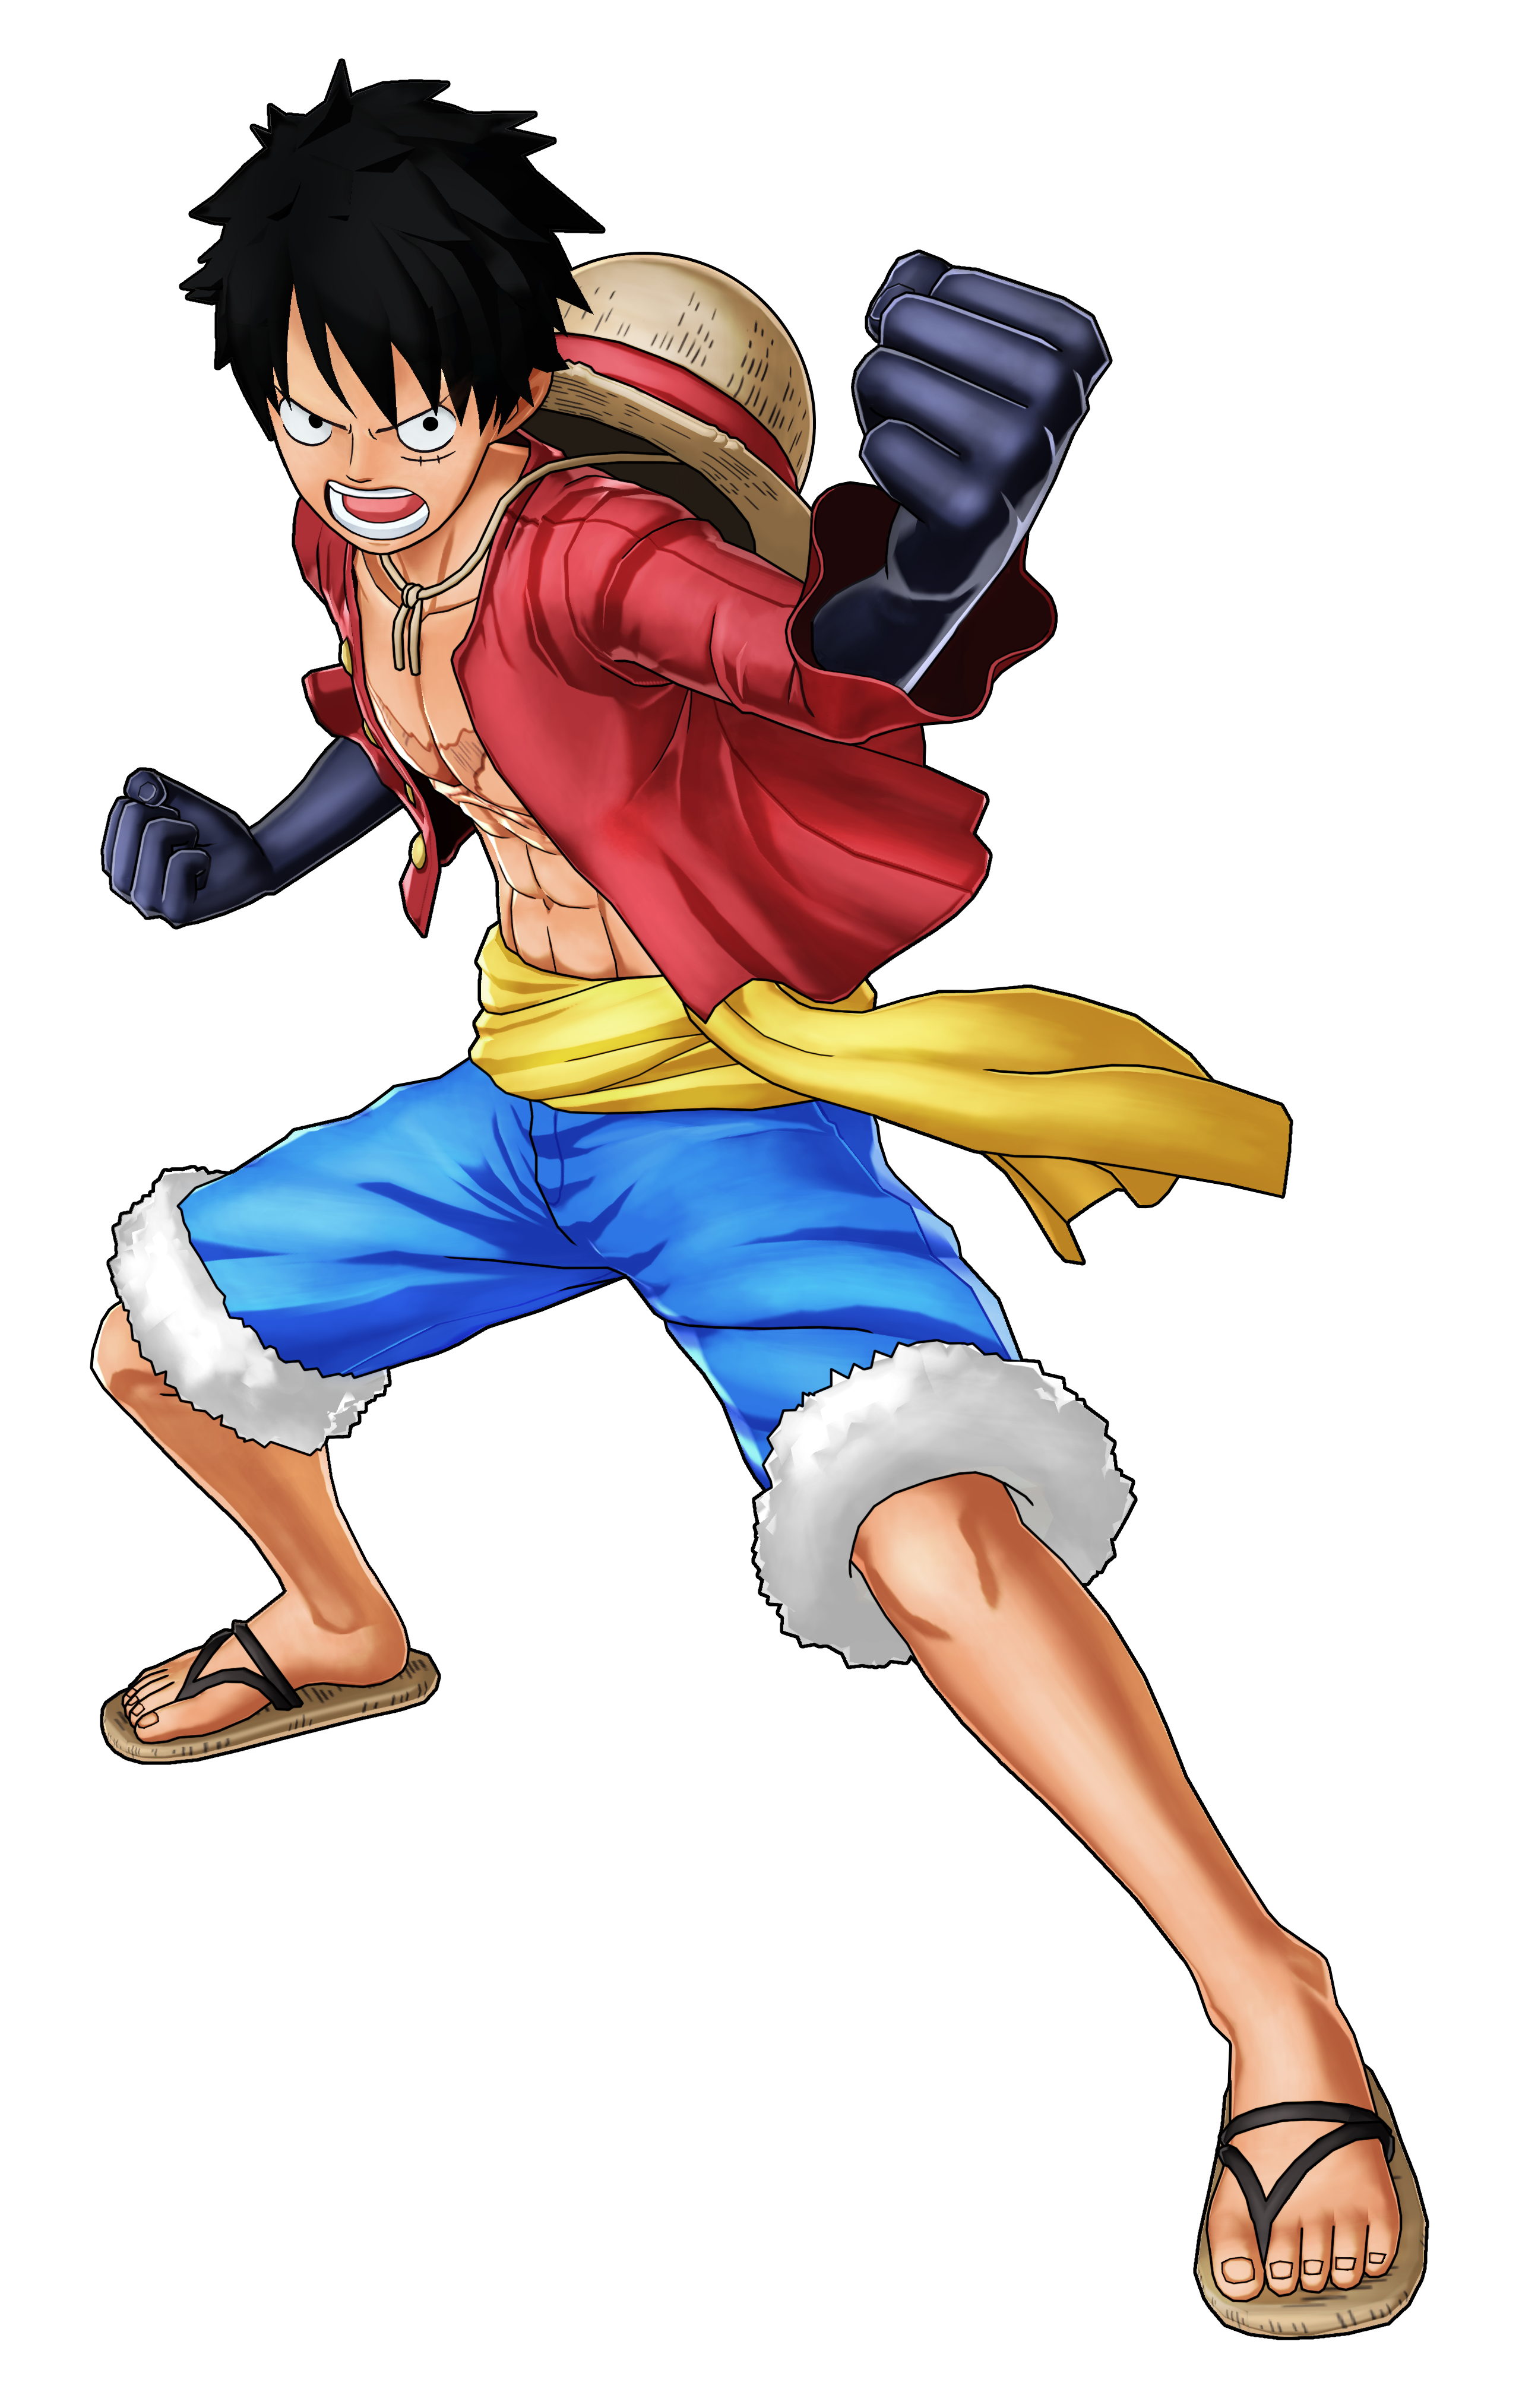 One Piece Luffy Png File - Luffy One Piece Png - Free Transparent PNG  Clipart Images Download. ClipartMax.com